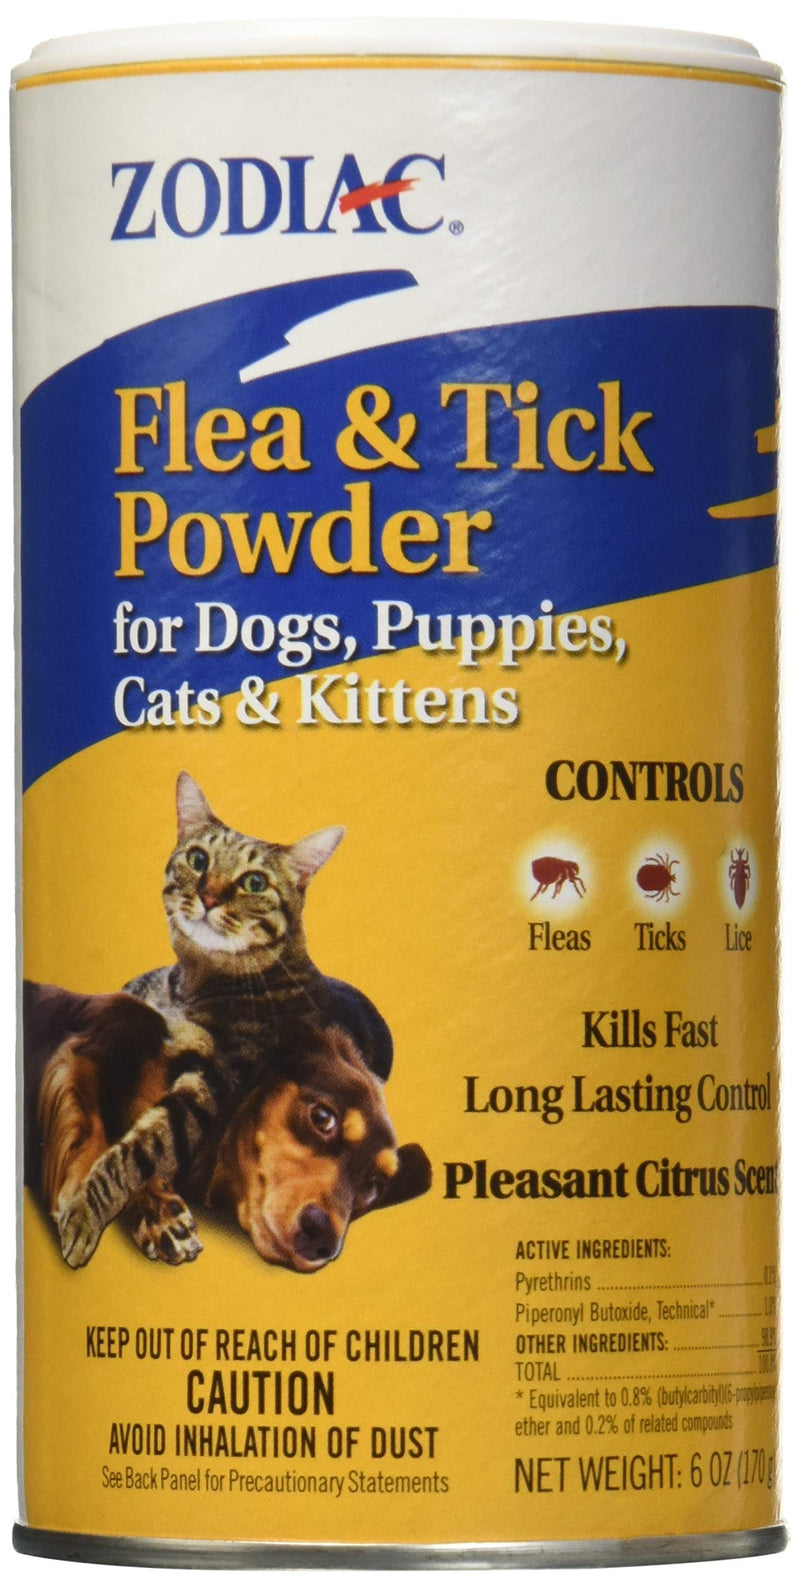 [Australia] - Zodiac Flea and Tick Powder for Dogs, Puppies, Cats, and Kittens 6oz (3 Pack) 